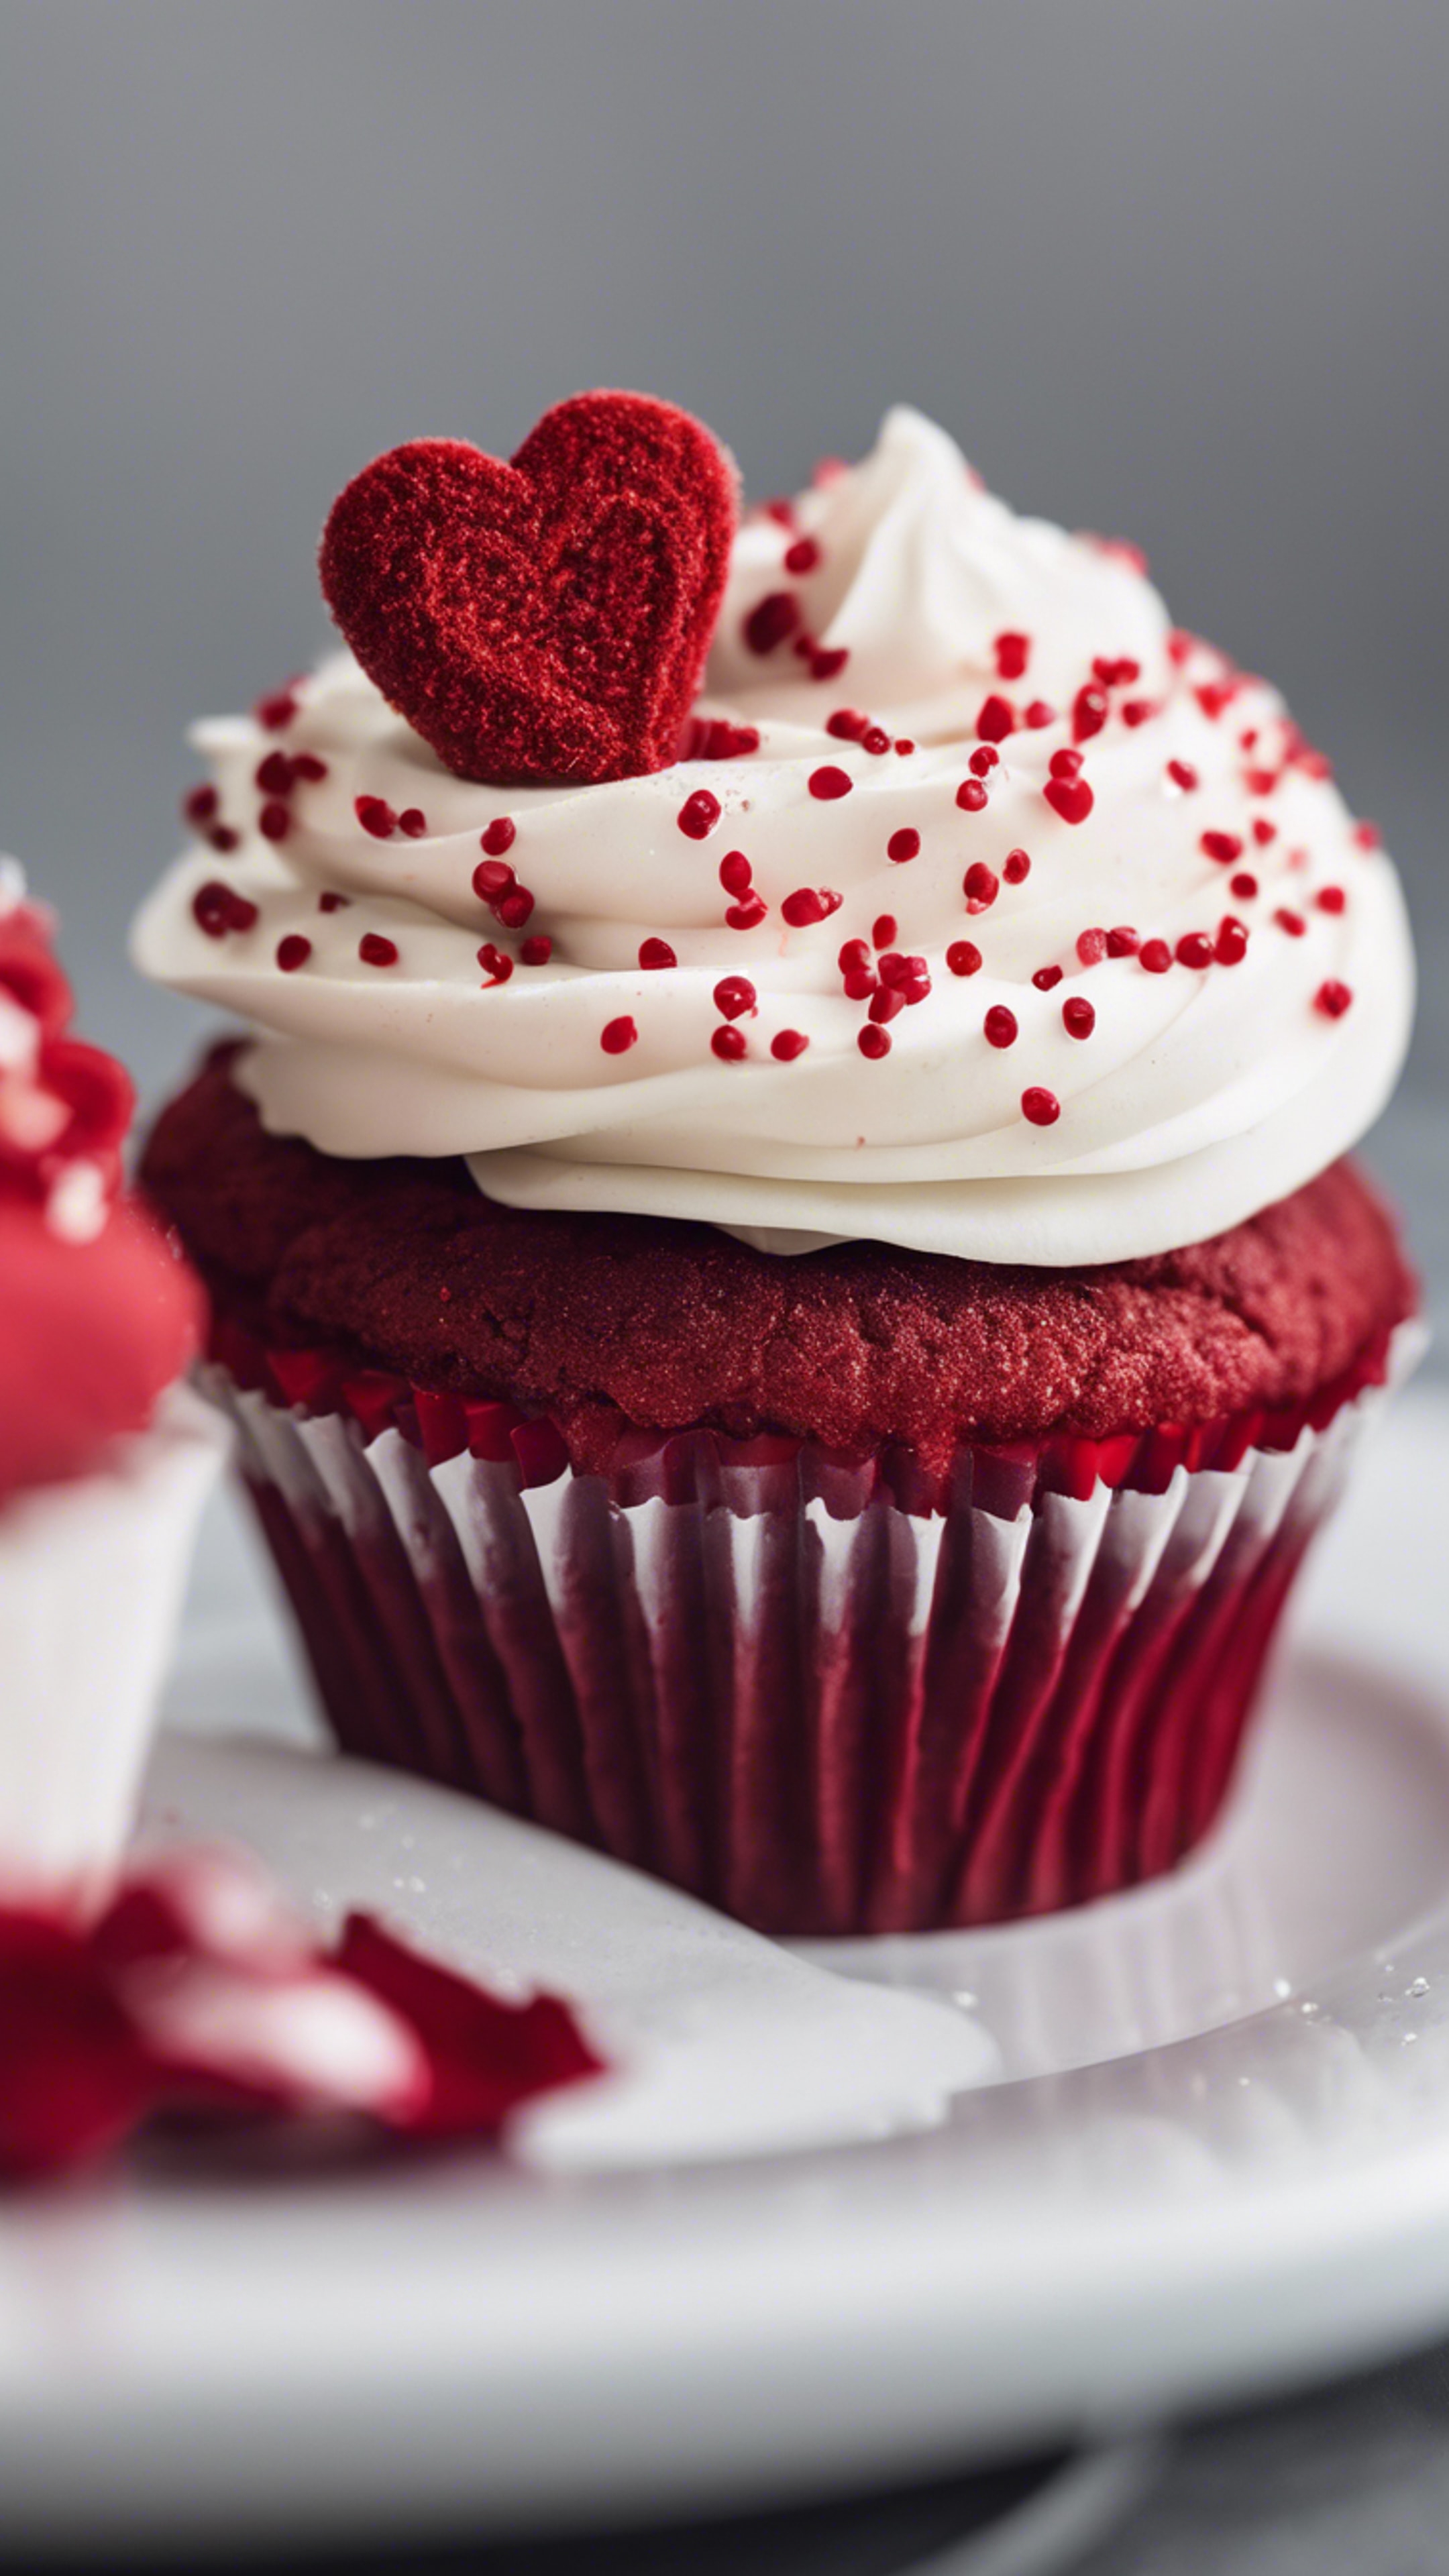 A red velvet cupcake with a heart-shaped sprinkle on top, presented on a white ceramic plate. Tapeta[2d98083c137b4c3e8f81]